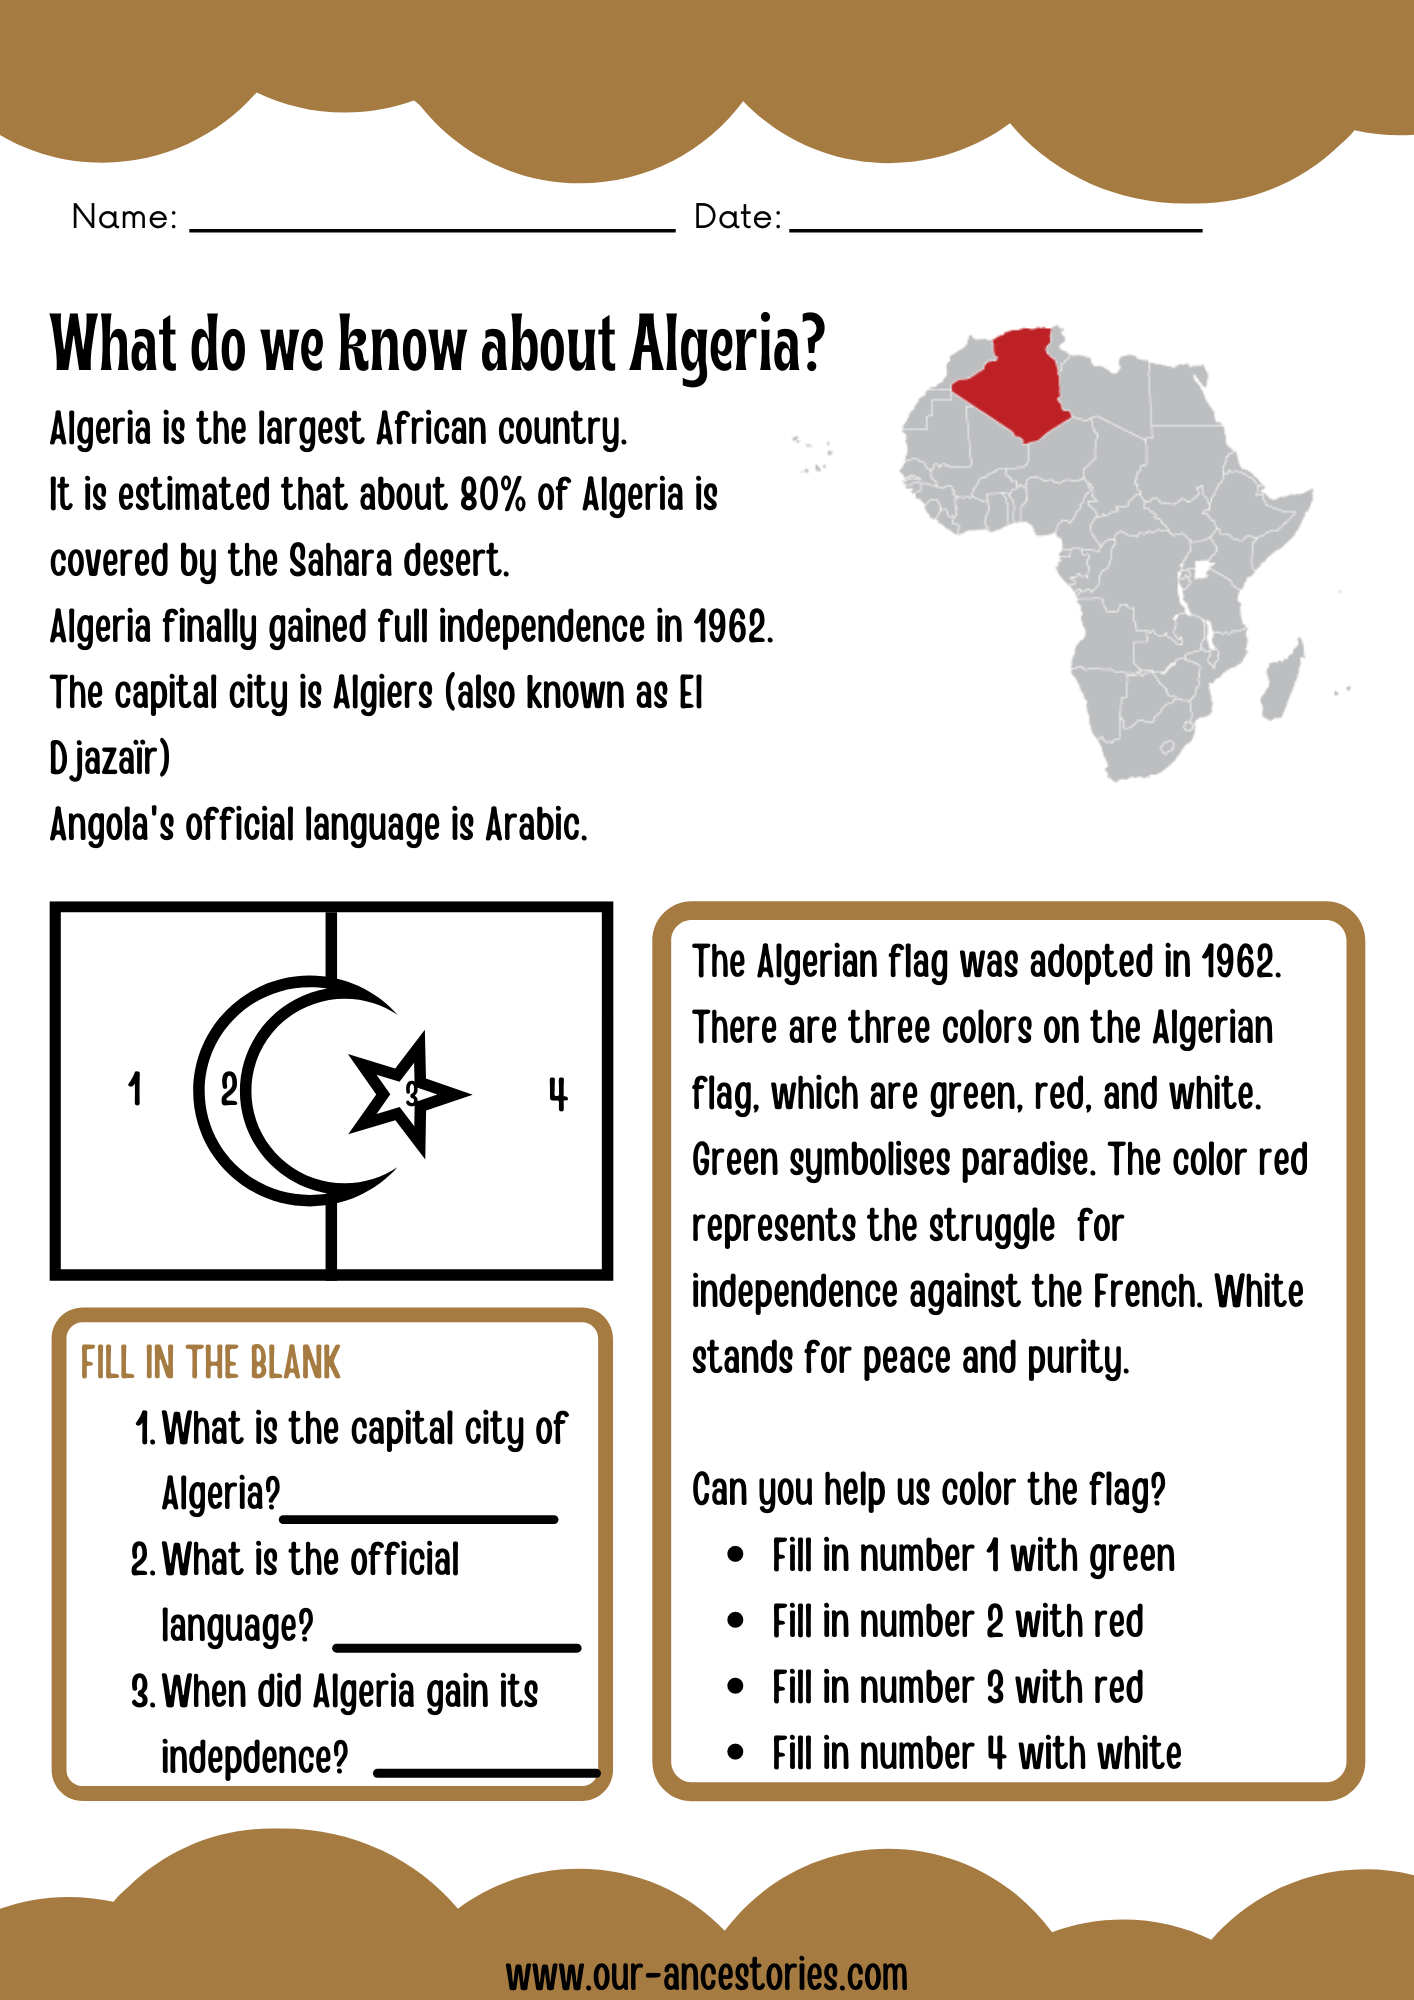 Our Ancestories - Algeria Country Profile - Free Worksheets